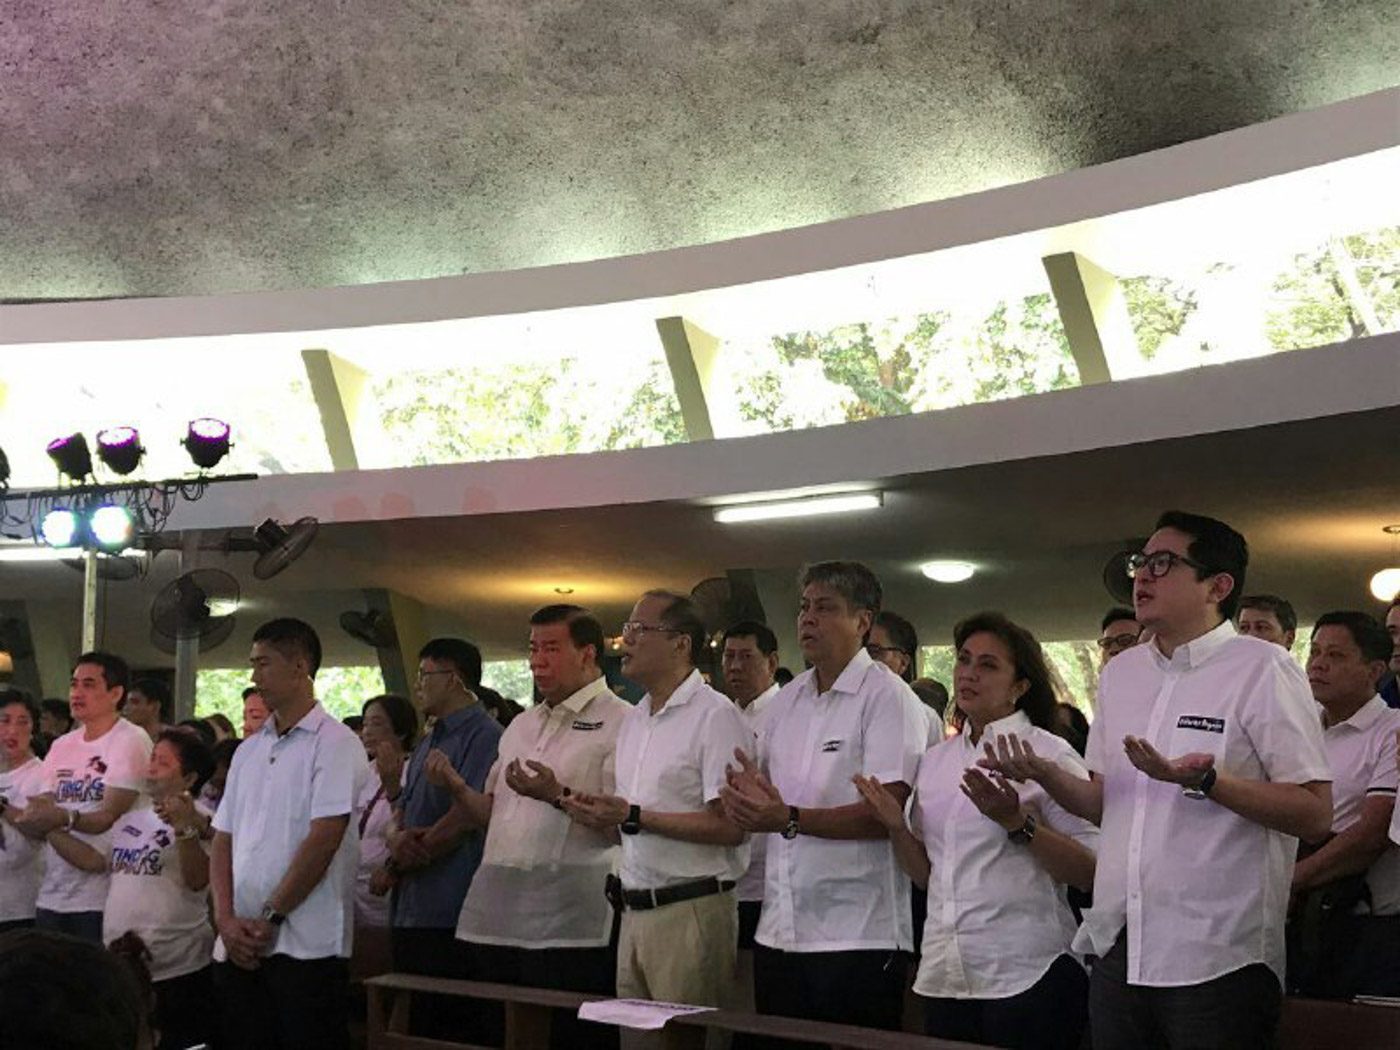 Aquino, Liberal Party members lead ‘Mass for justice’